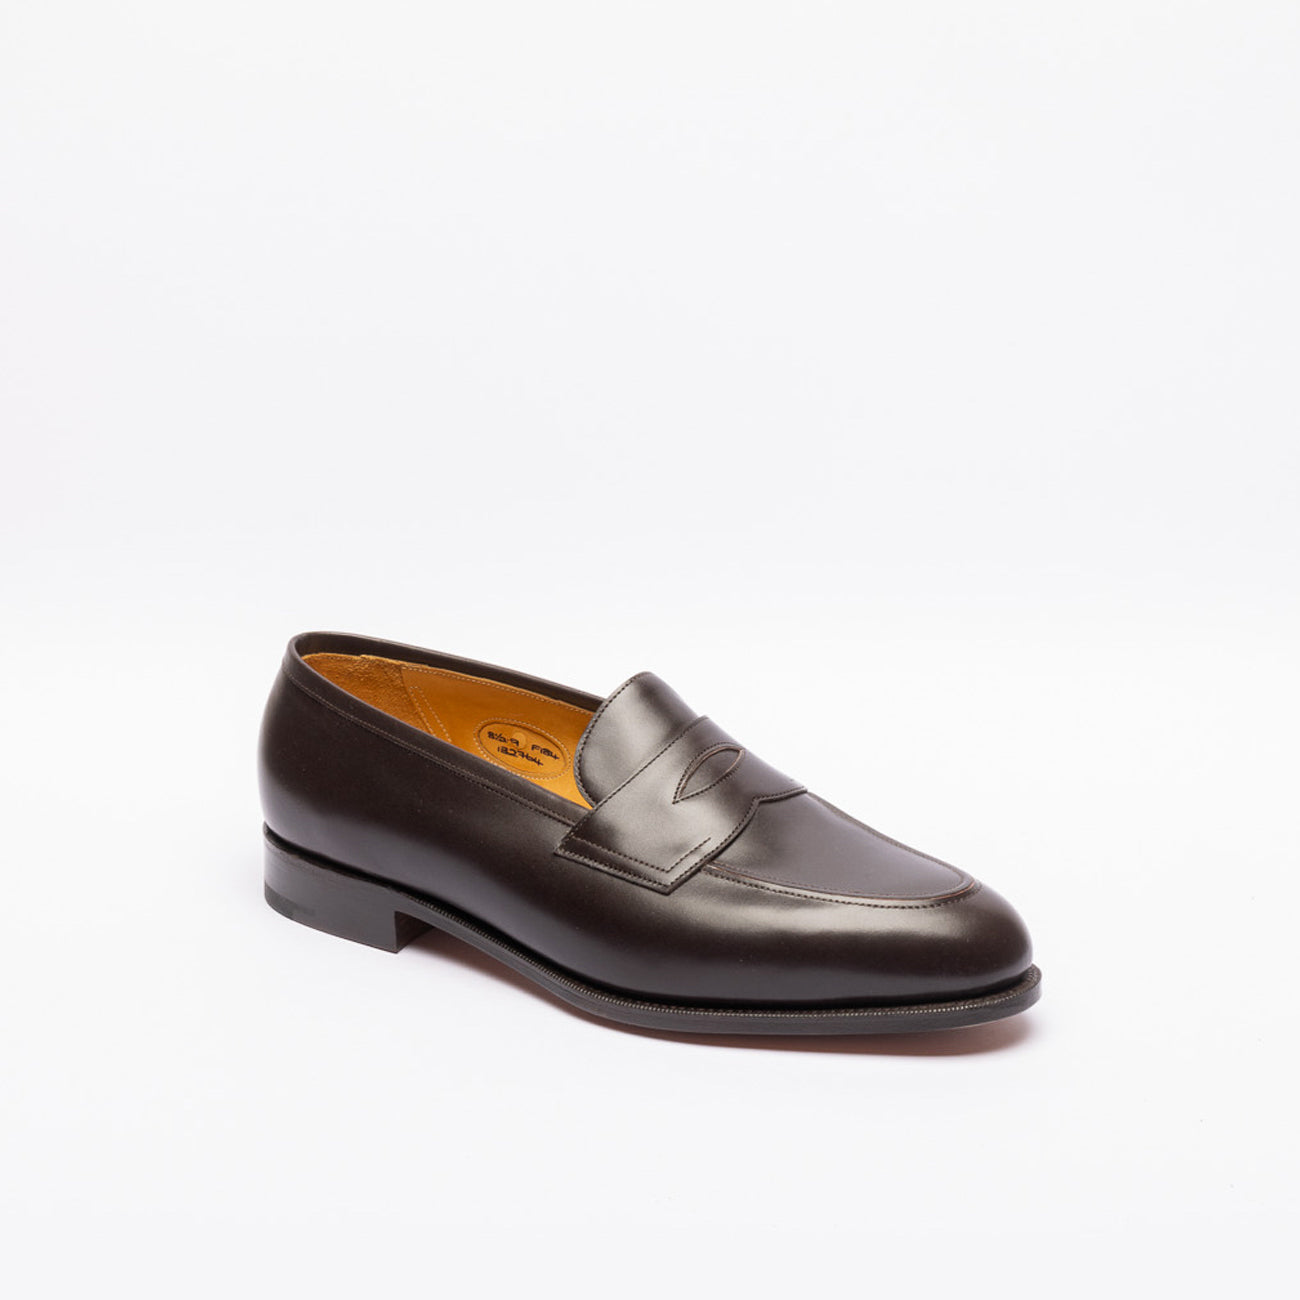 Edward Green penny loafer dark brown leather